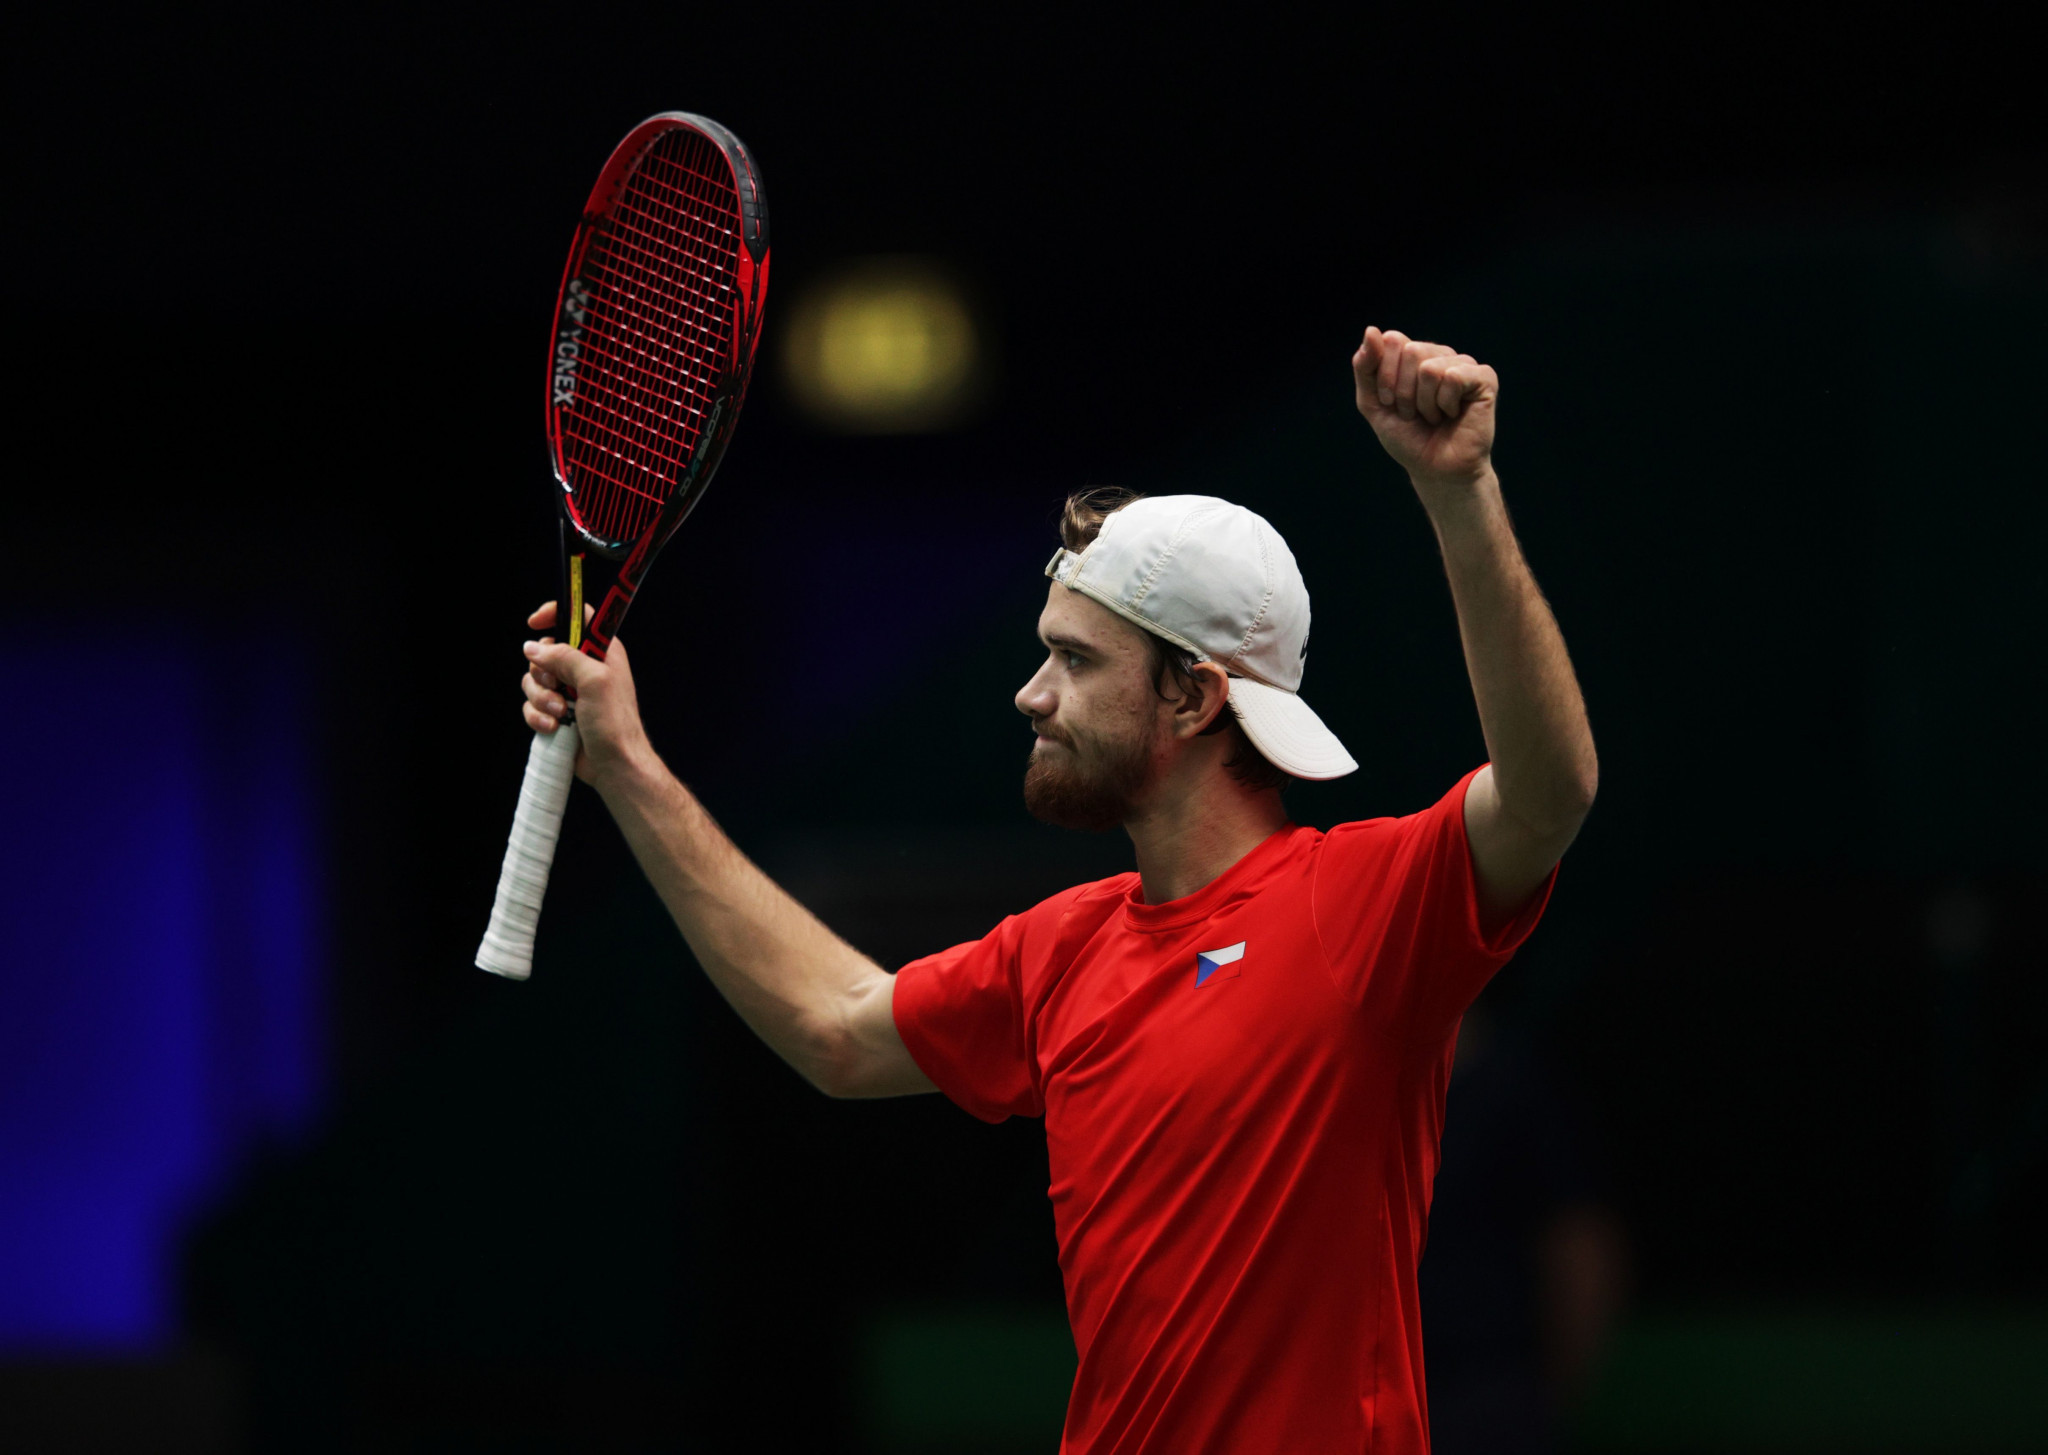 Sweden, France and Croatia win opening group matches on day one of Davis Cup Finals